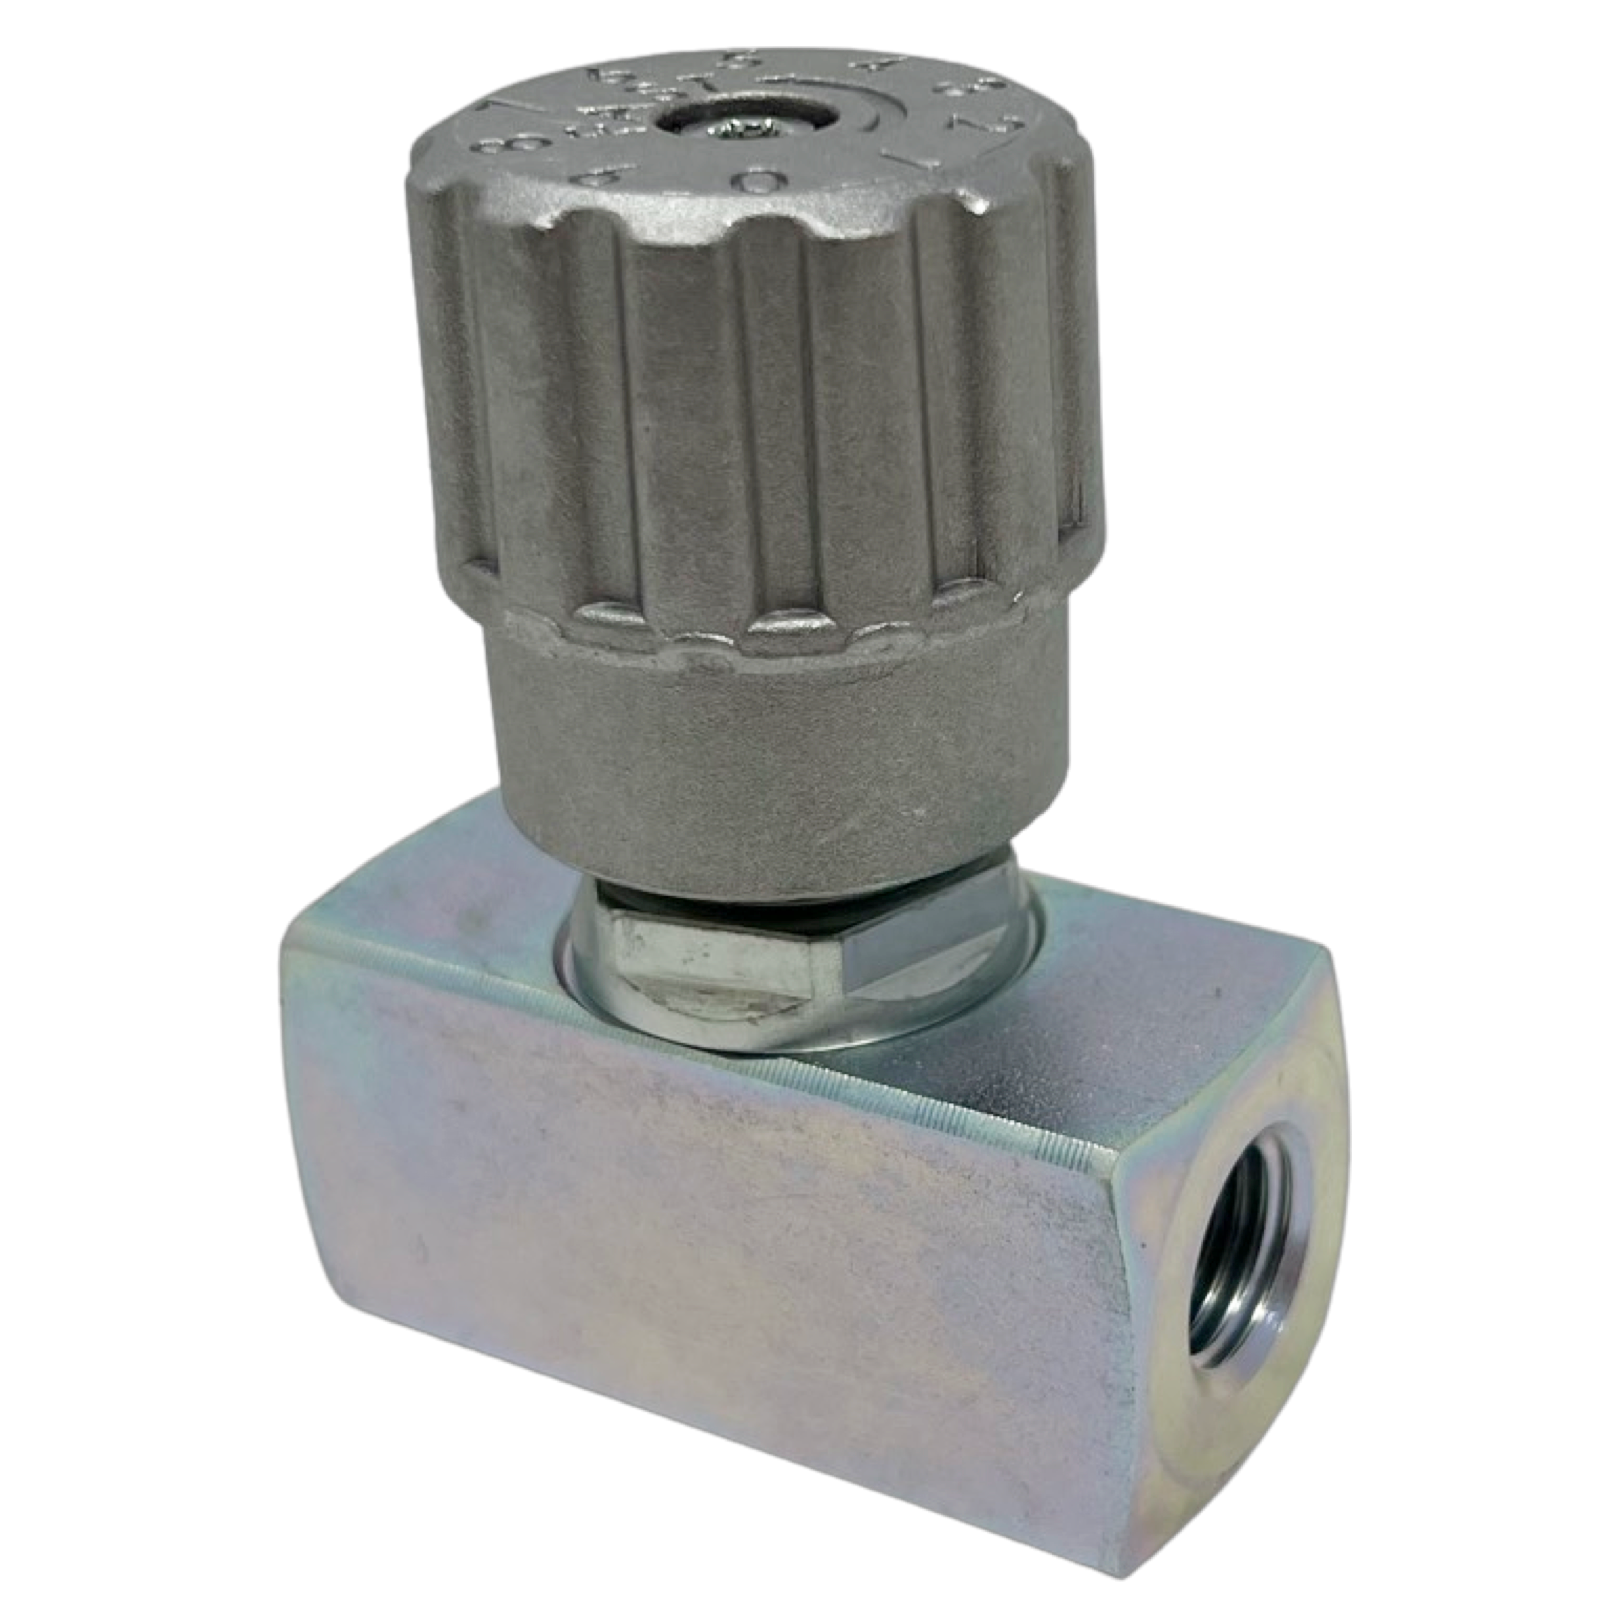 NN1-1/2-1 : AFP Needle Valve, 1.5" NPT, 4000psi and 80GPM Flow Rated, Steel